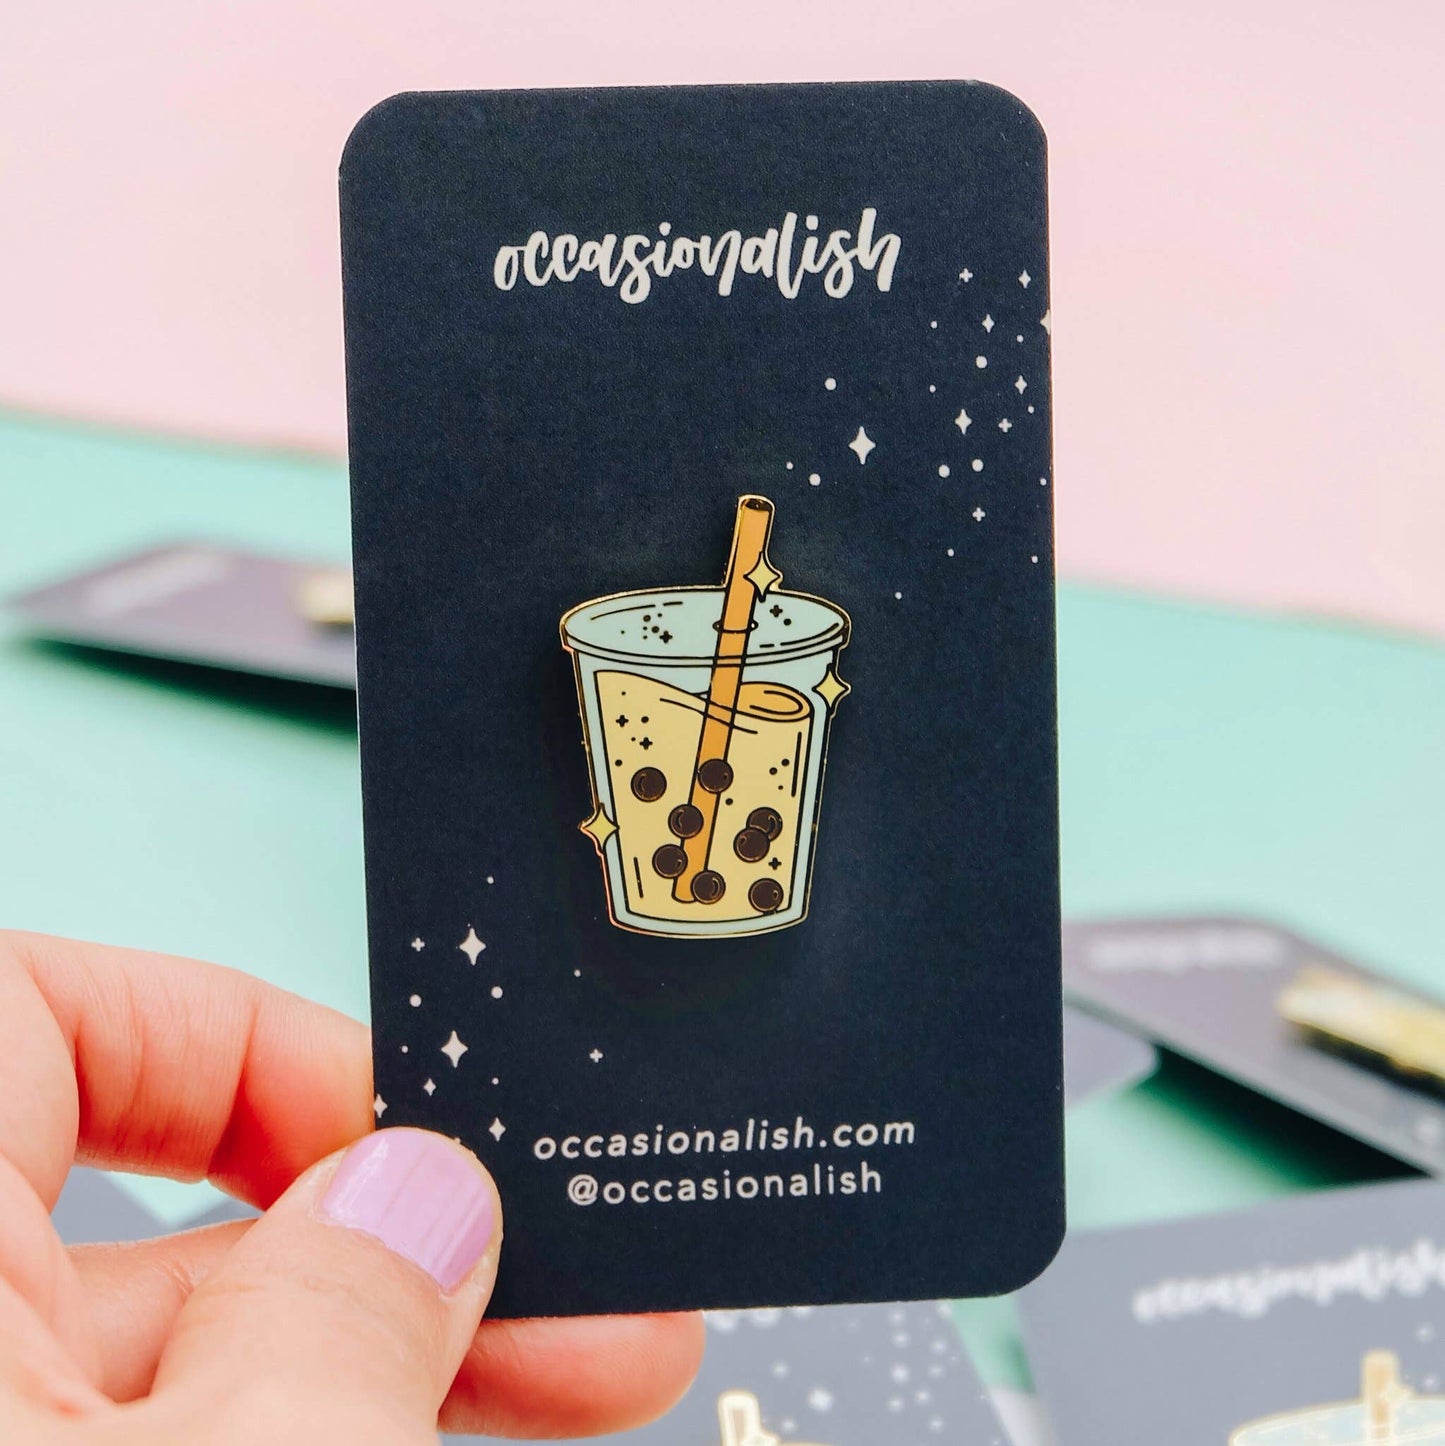 Boba Lapel pin with an orange straw and sparkles. The pin is on a navy card backing with Occasionalish logo.